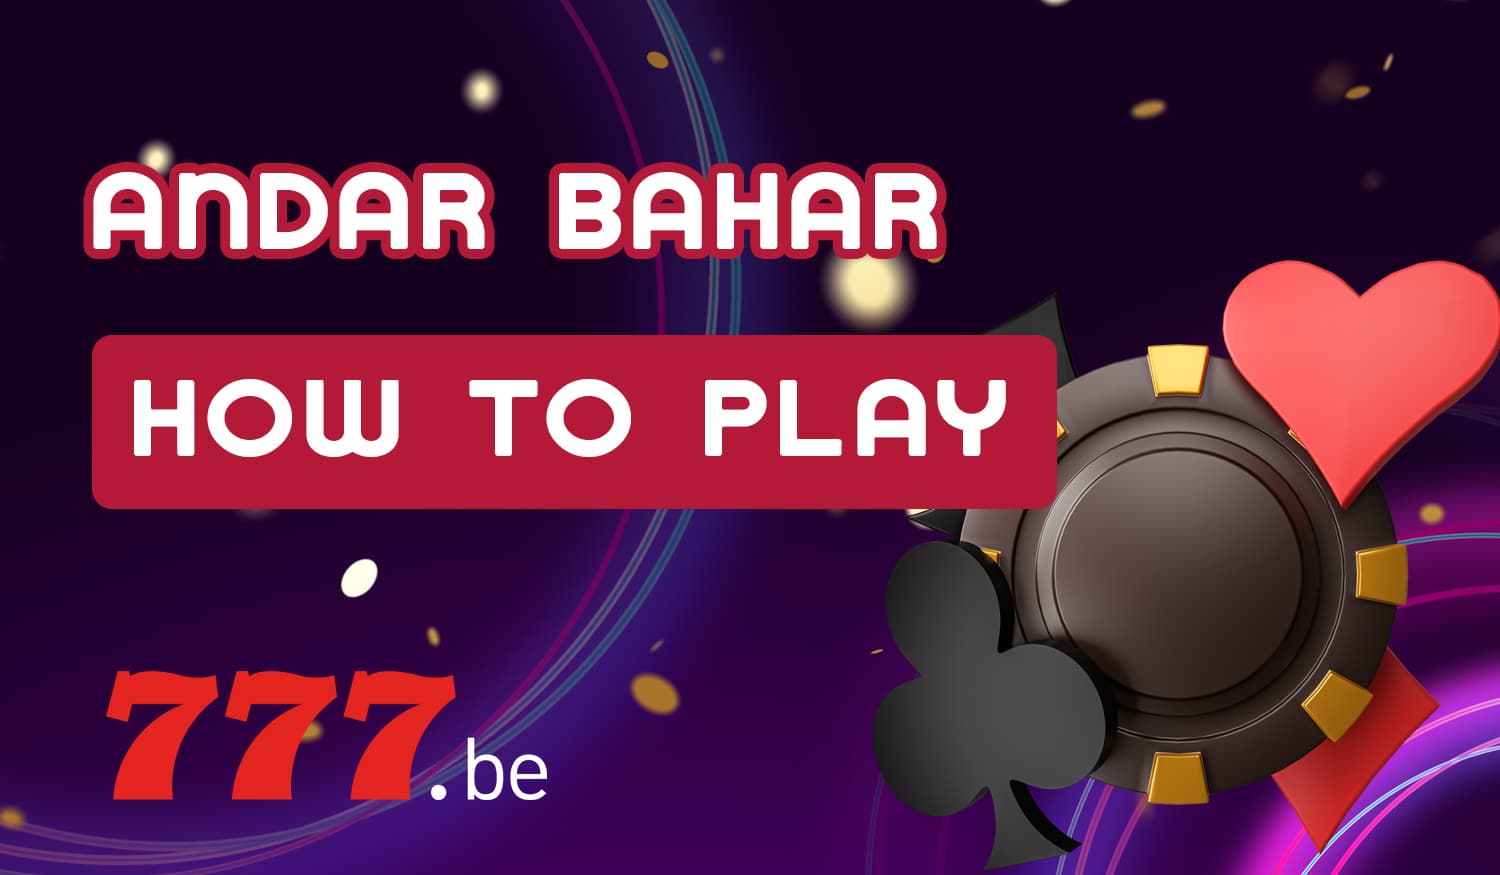 Step by step instructions for Indian Bet777 users to play Andar Bahar